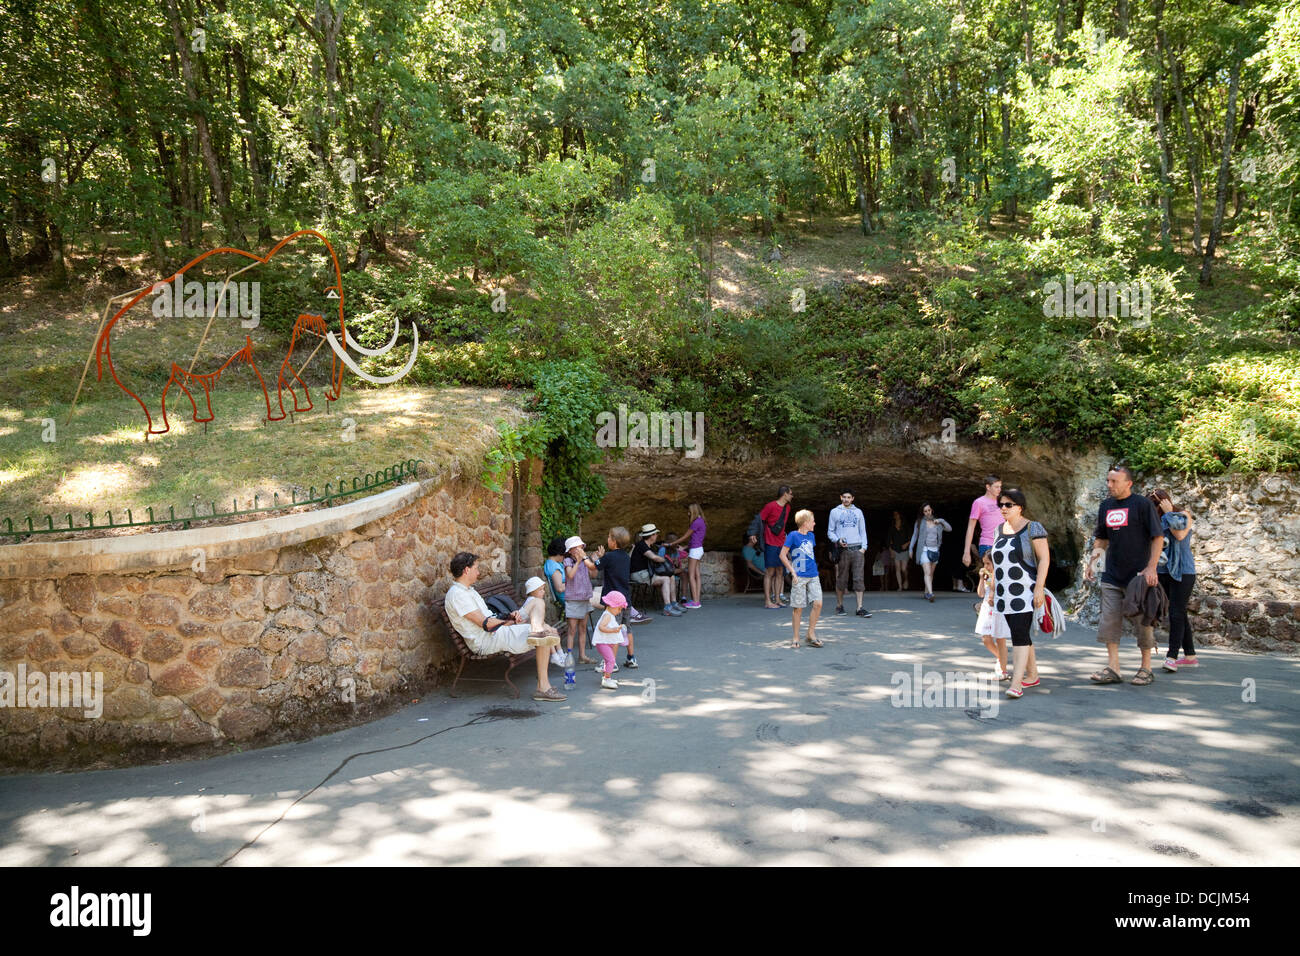 Tourists waiting at the entrance for a tour of the Grotte de Rouffignac ( Rouffinac Cave ), Perigord, Dordogne, France Europe Stock Photo